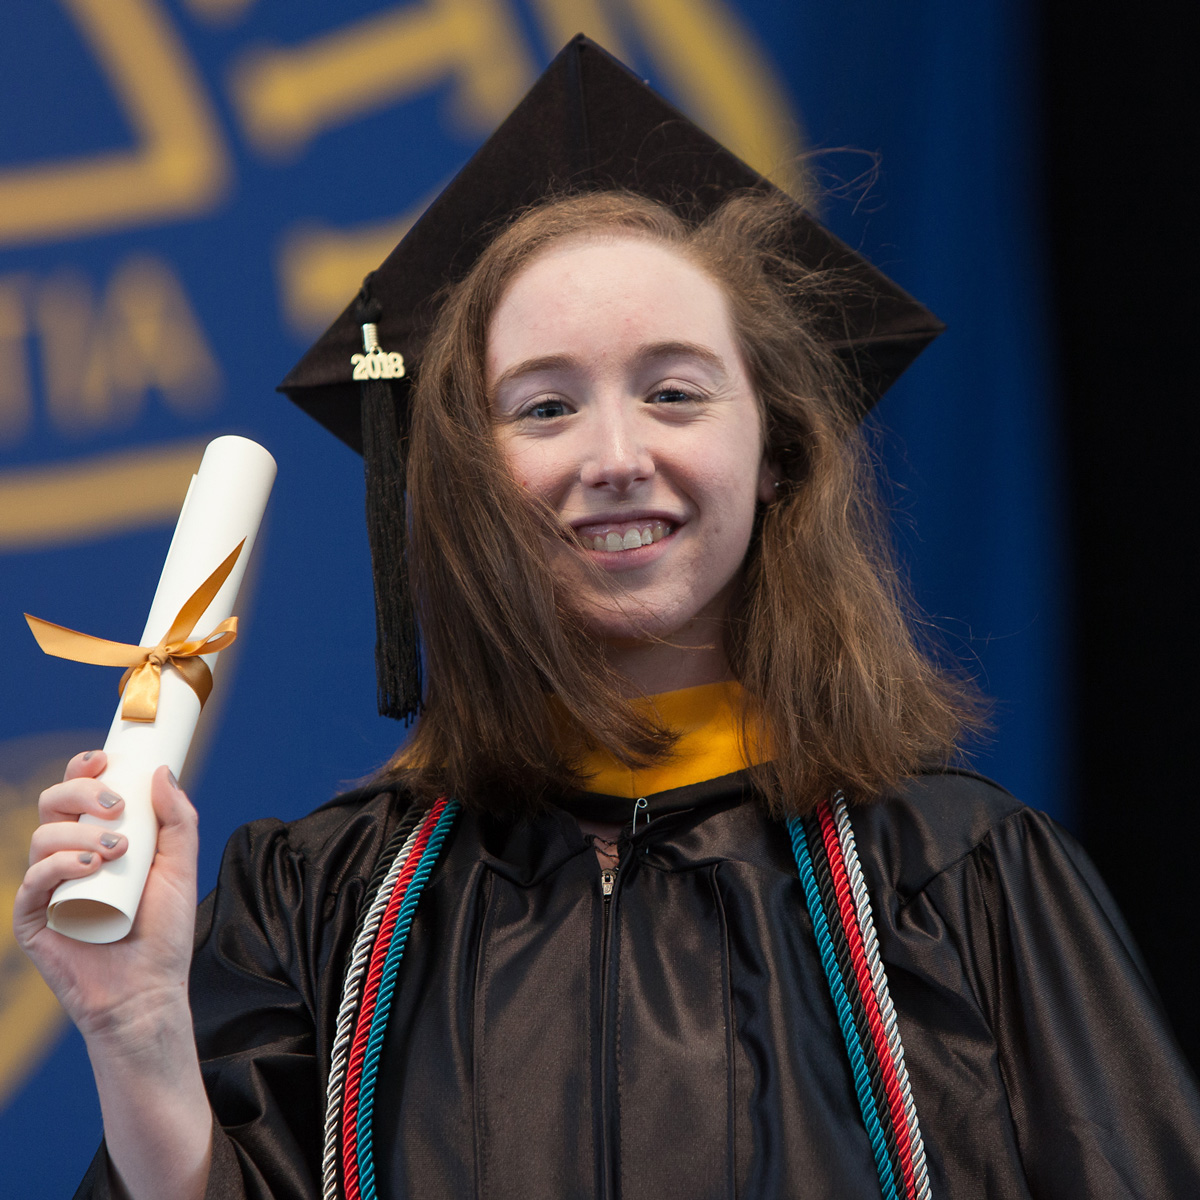 Ashley holding up her scroll while walking across the stage during Commencement.